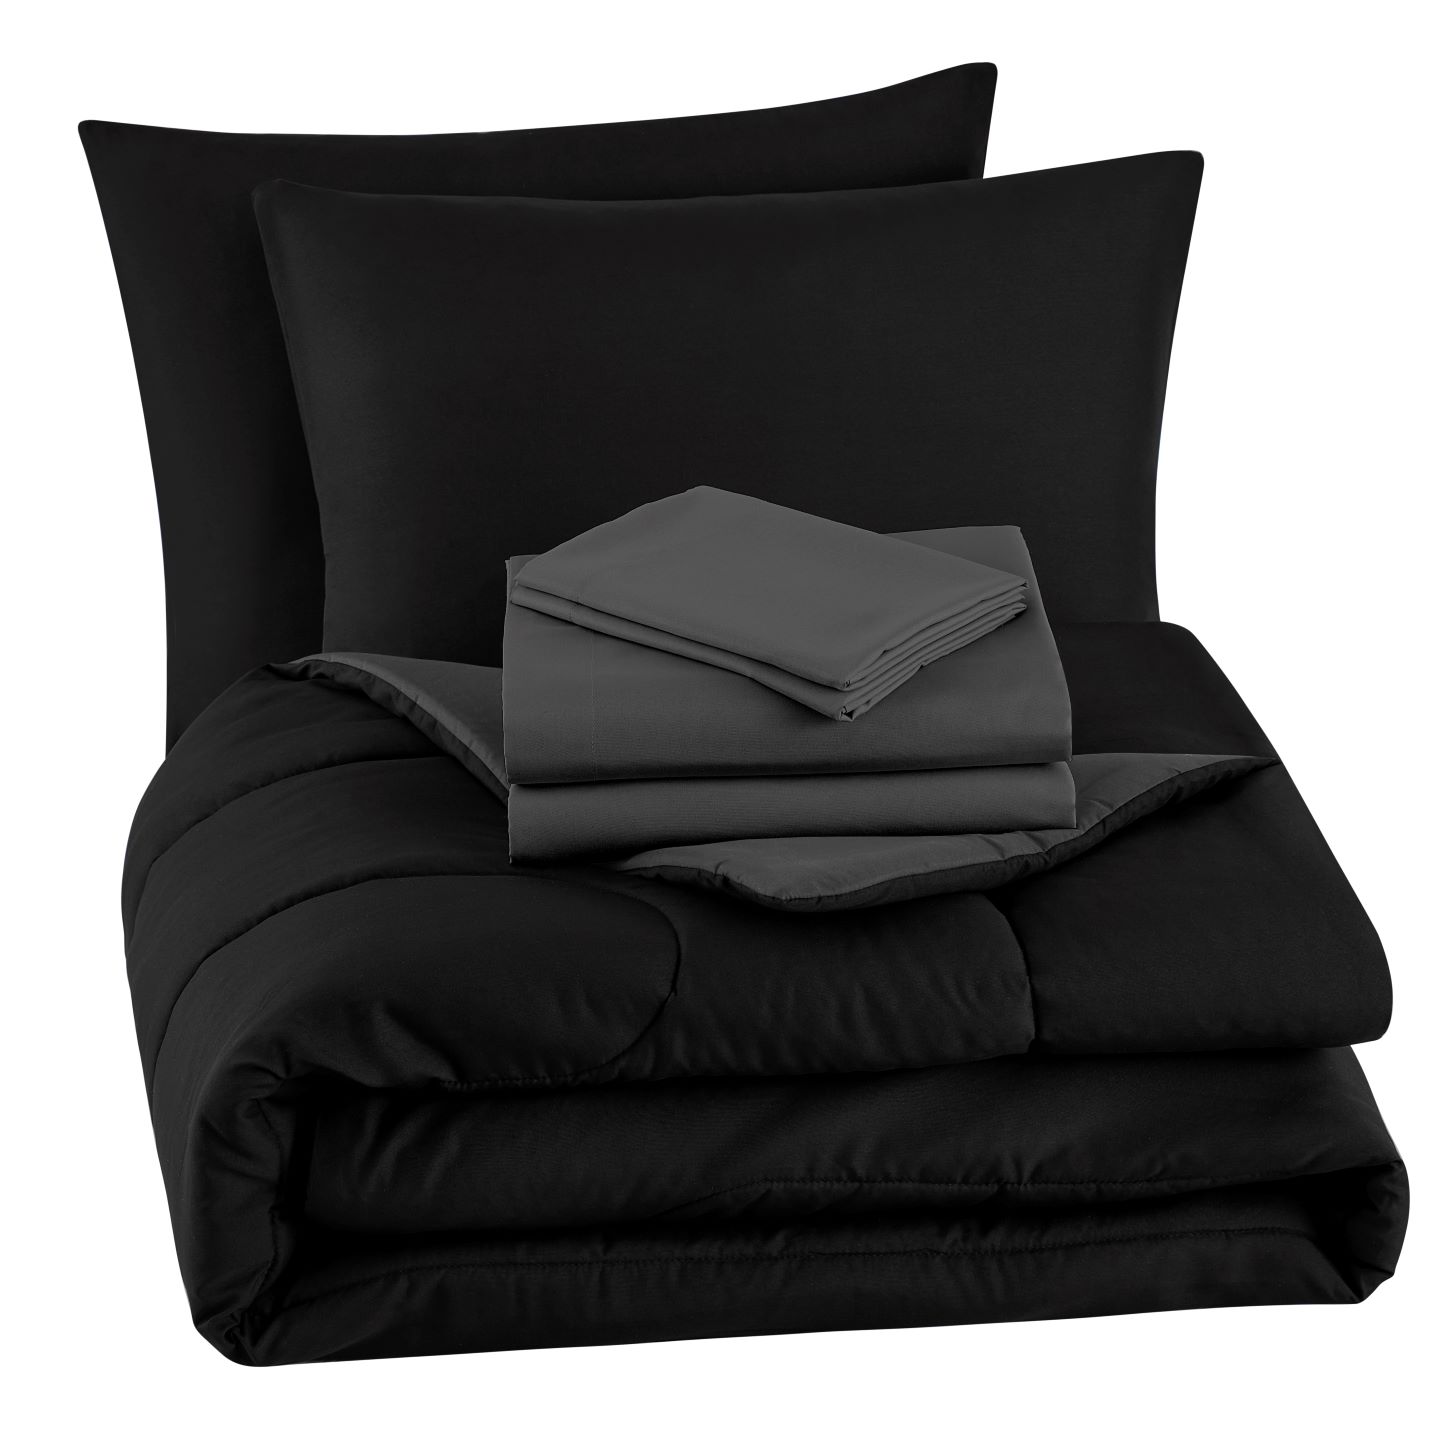 Mainstays Black Reversible 7-Piece Bed in a Bag Comforter Set with Sheets, Queen - image 5 of 8